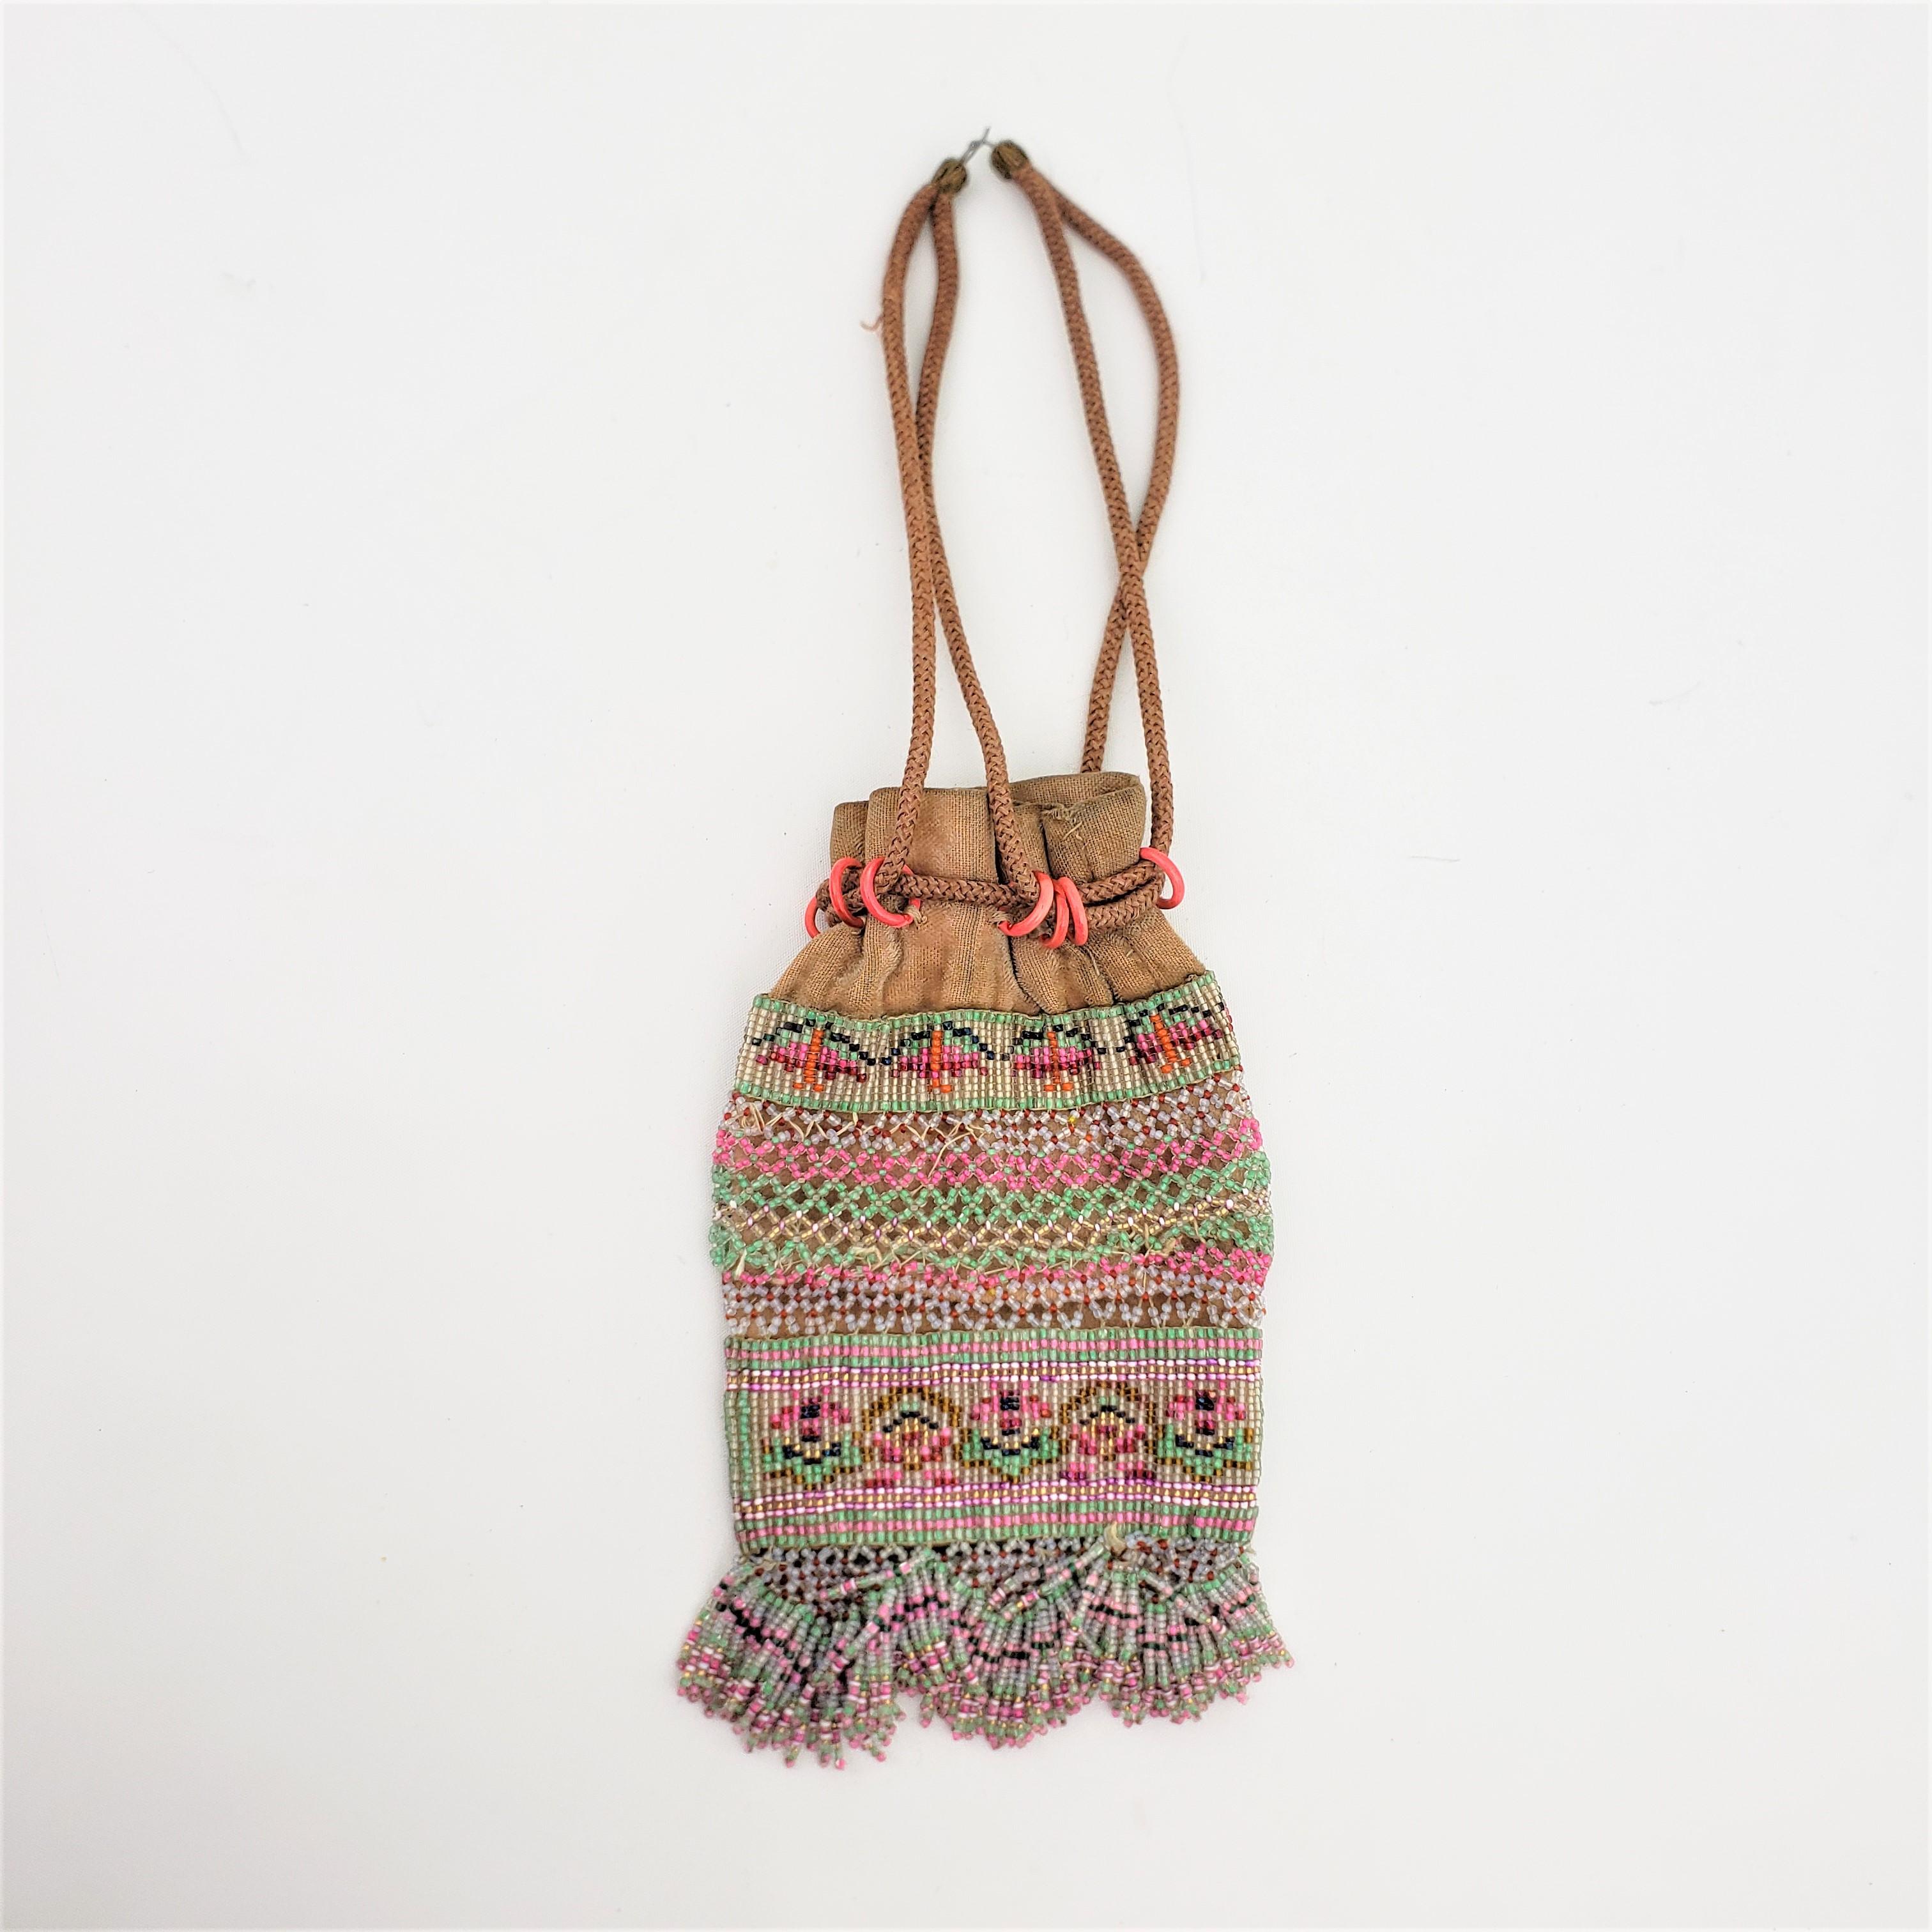 This small hand-crafted beaded leather pouch or tobacco bag is unsigned, but presumed to have been made in the United States in approximately 1970 in an Indigenous American folk art style. The bag itself is composed of a heavy leather with a series